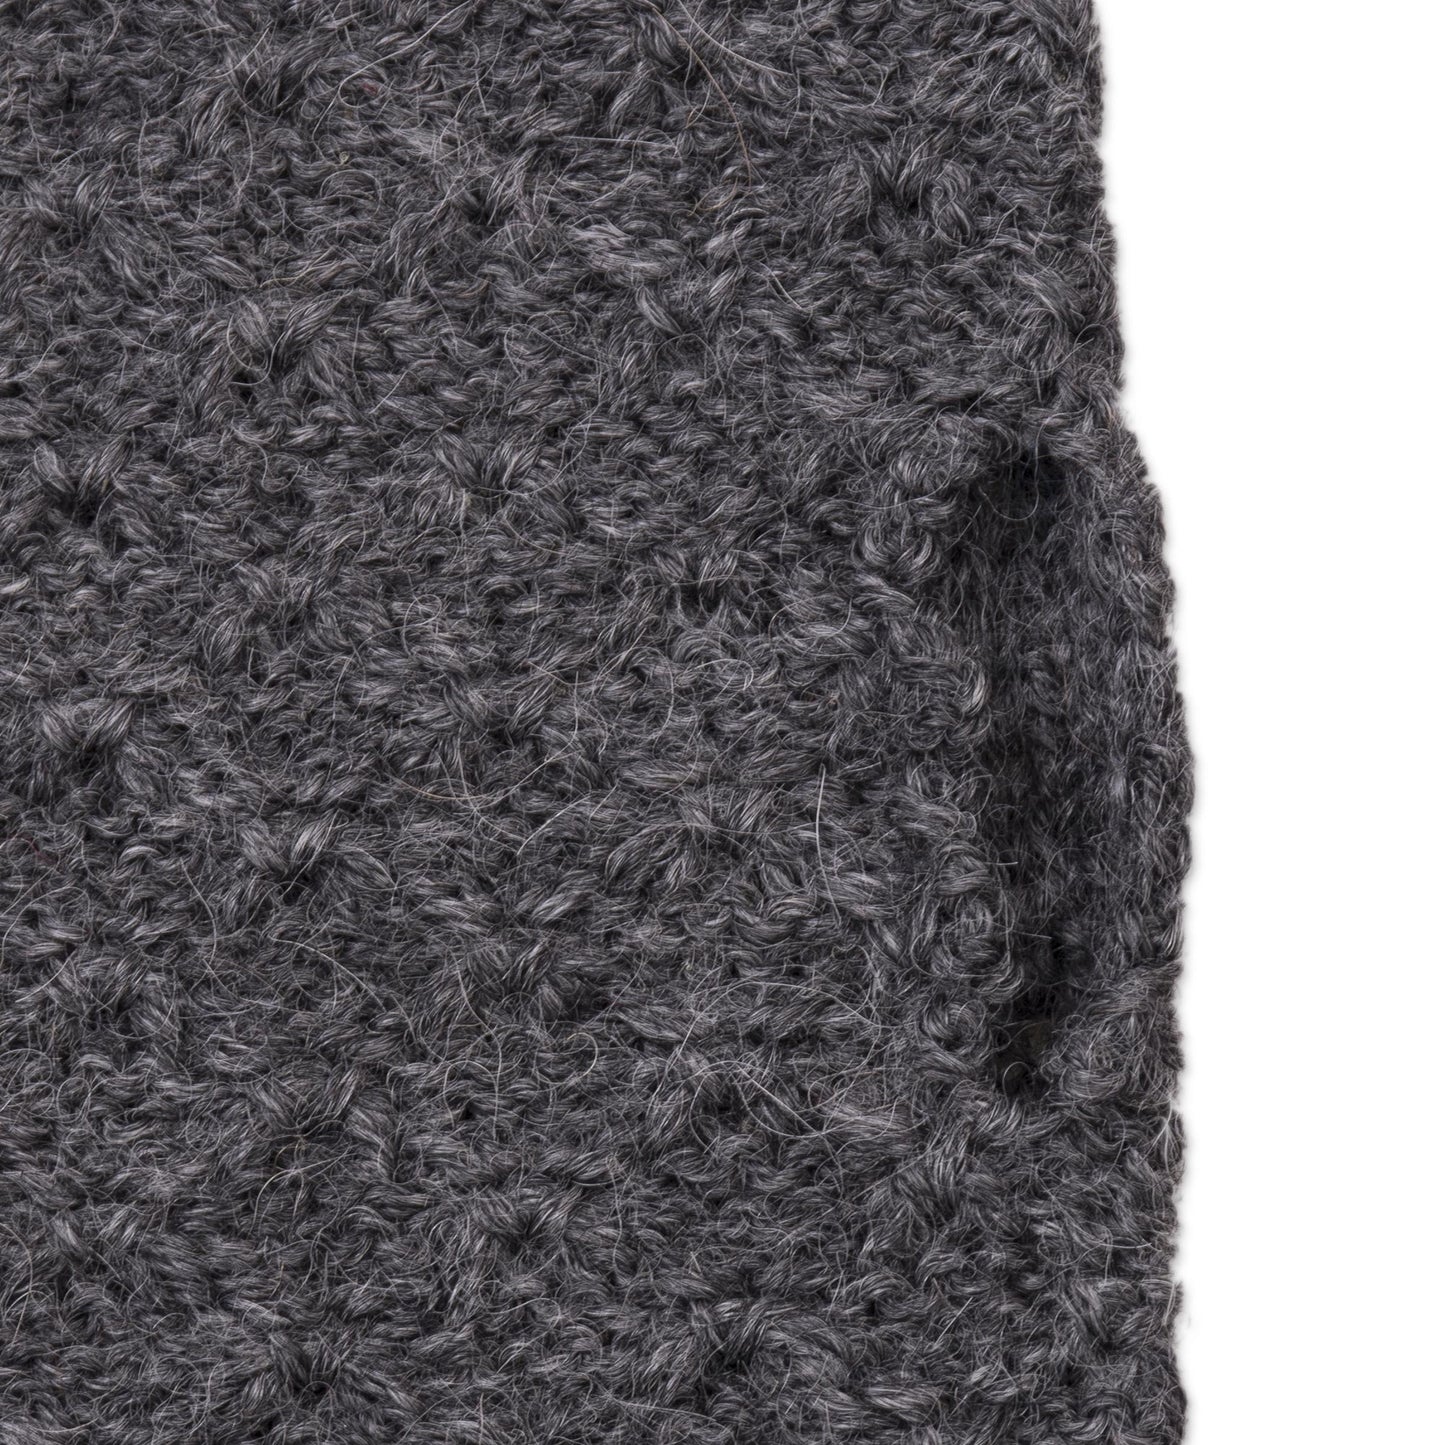 Passionate Pattern in Graphite Patterned 100% Baby Alpaca Fingerless Mitts in Graphite